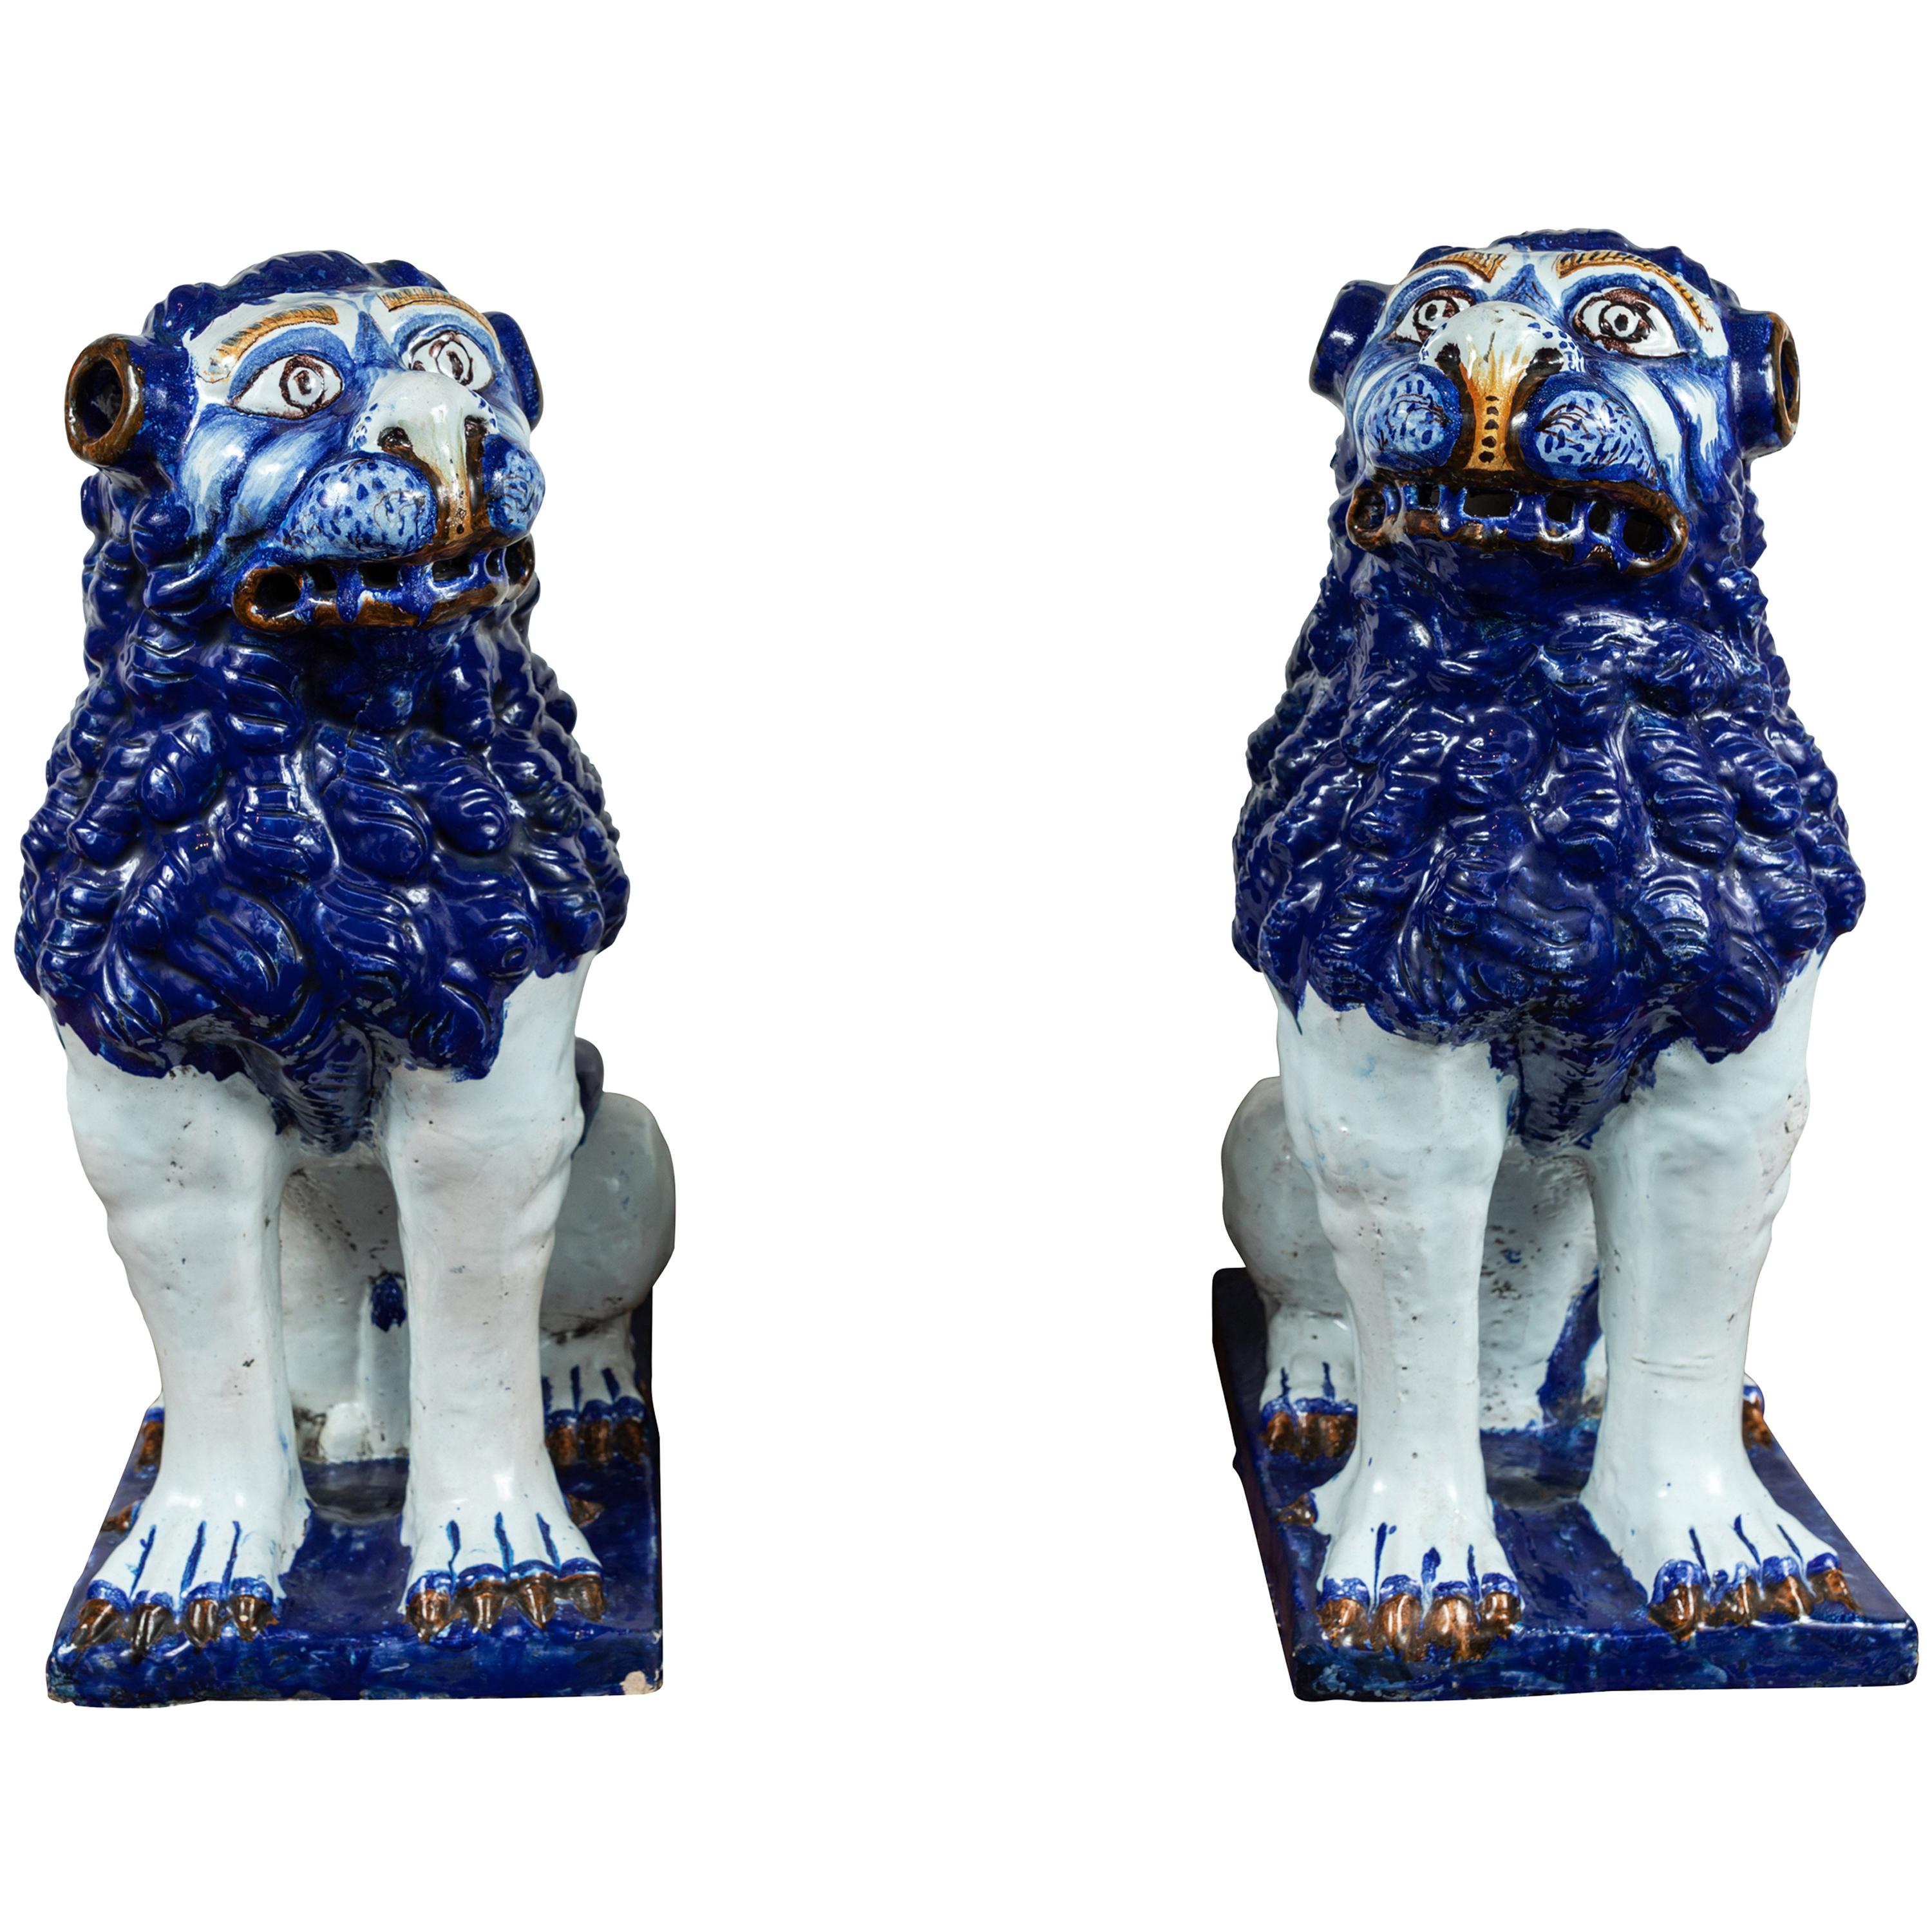 What do Chinese foo dogs represent?